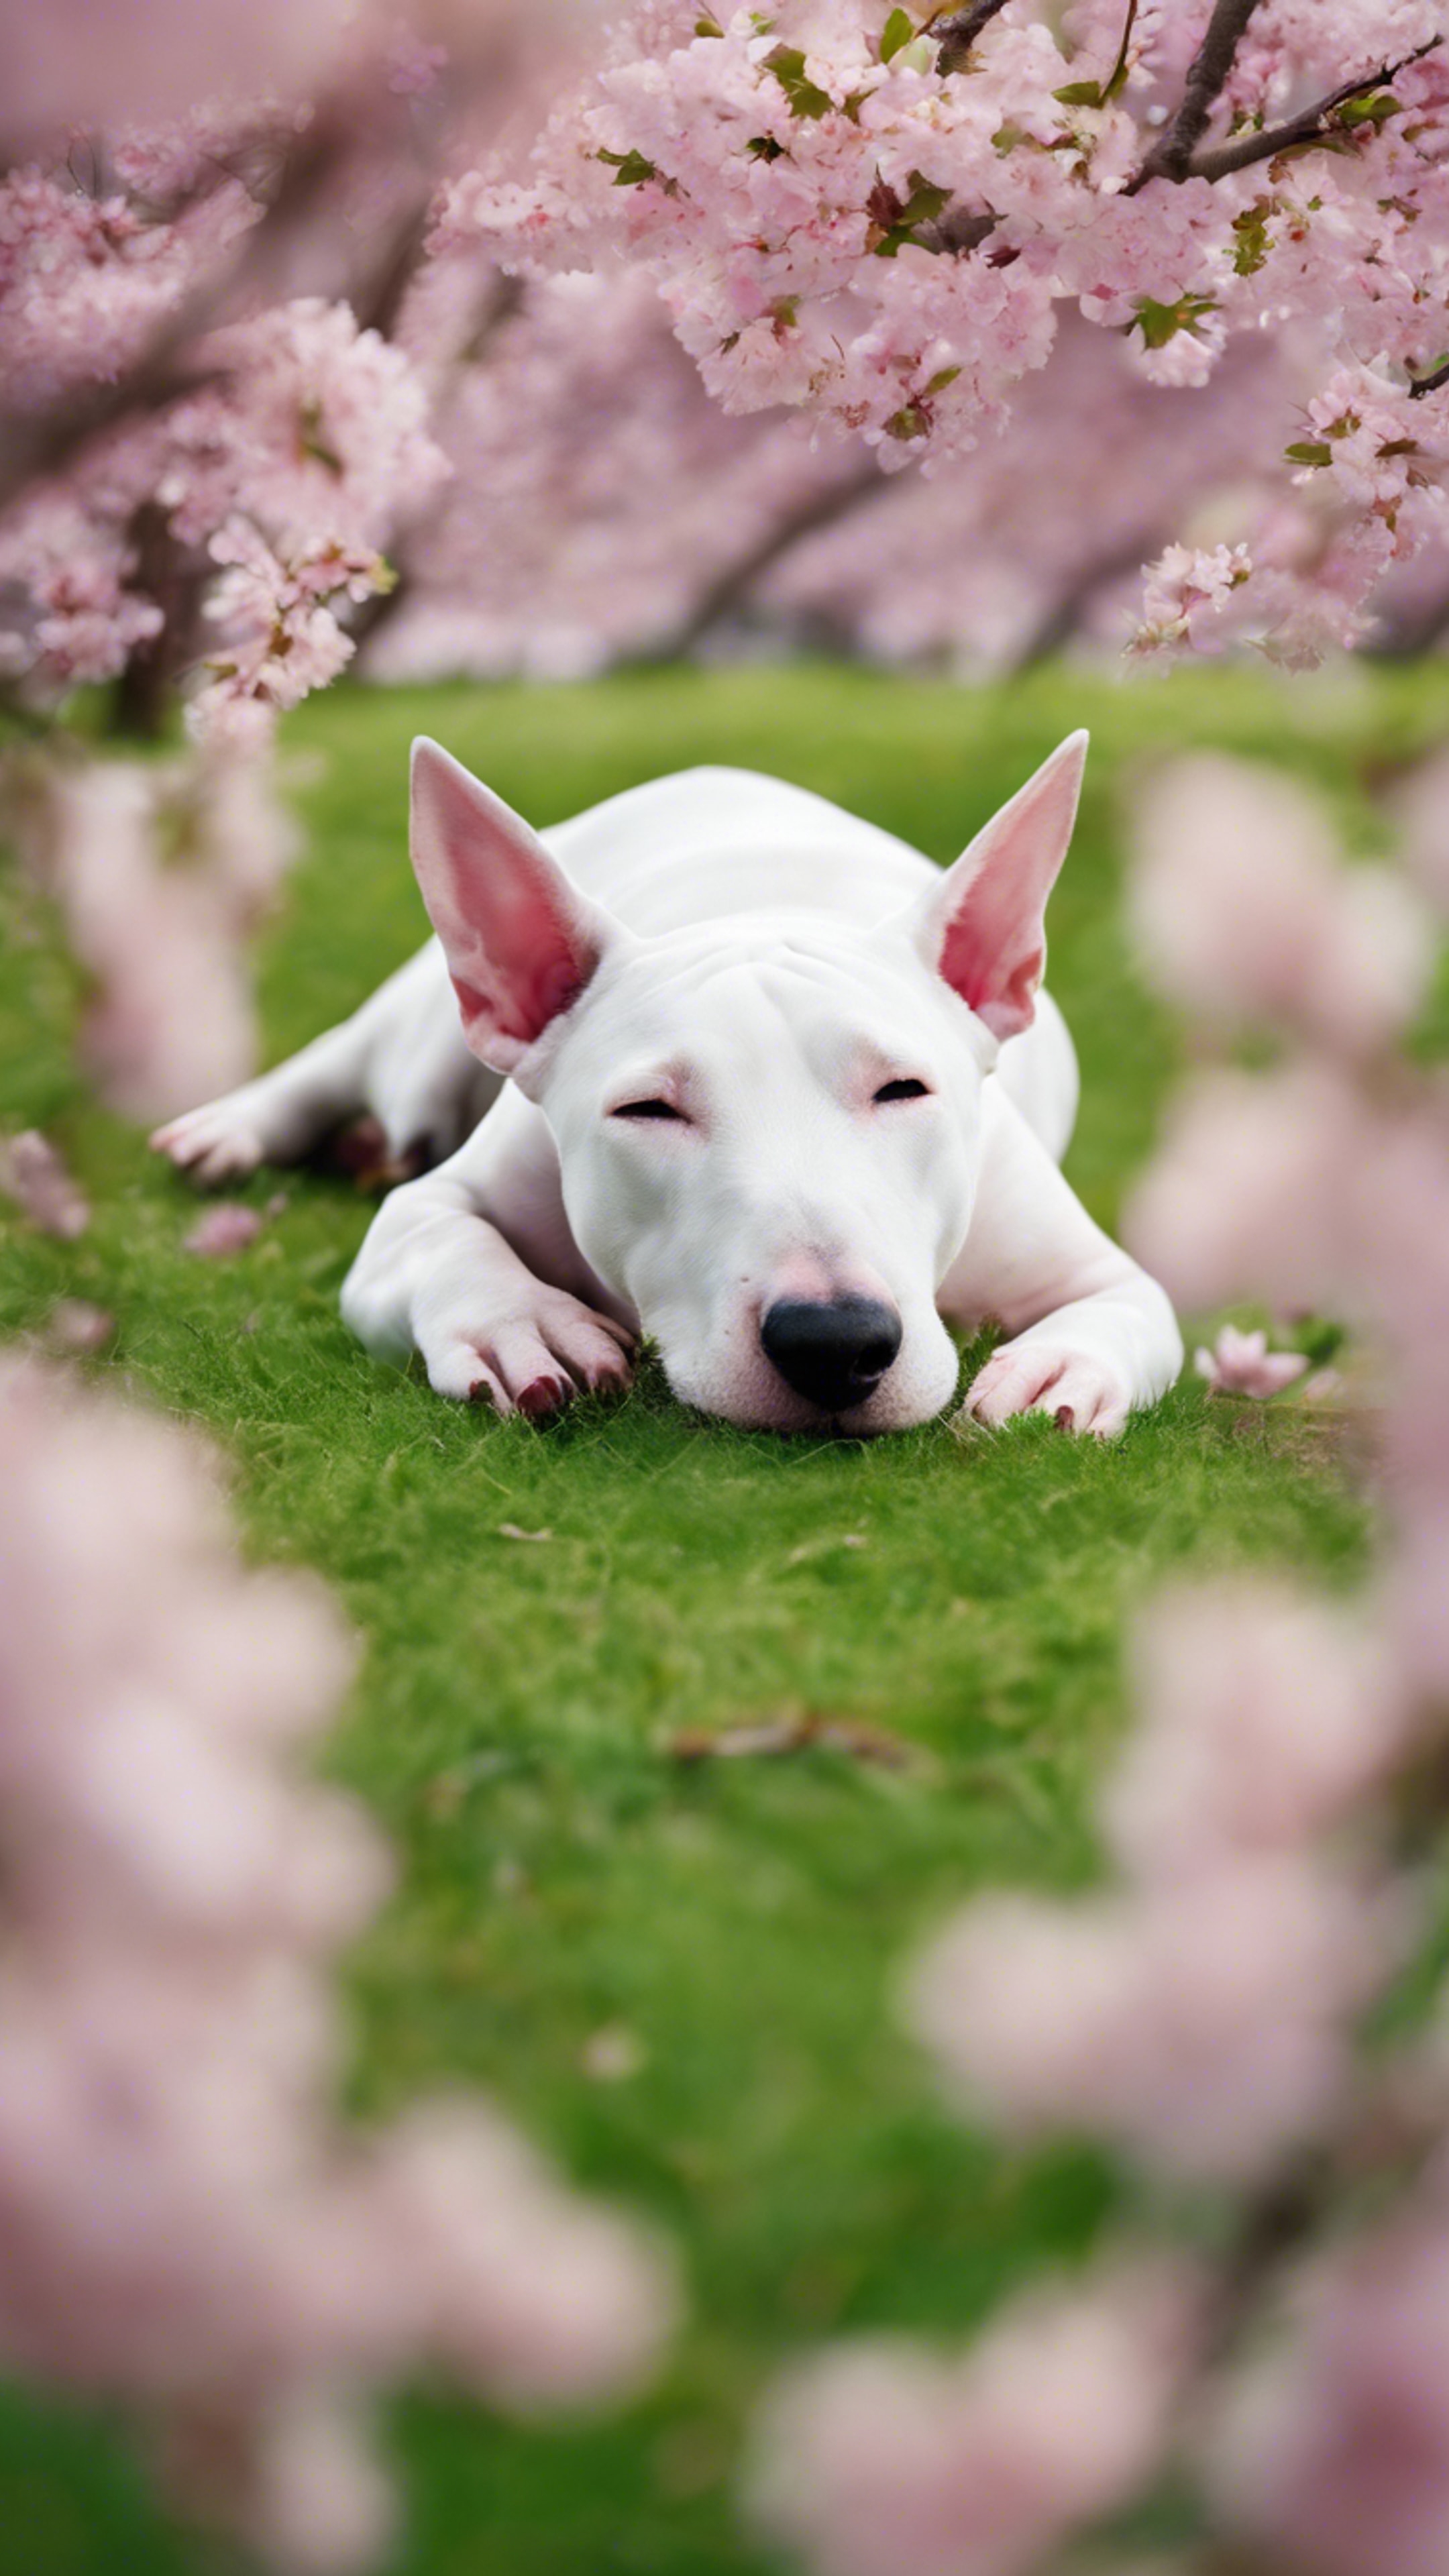 A Bull Terrier curled into a ball, sleeping in a bright green city park at the base of a cherry blossom tree. טפט[3df408a3b3f7480298db]